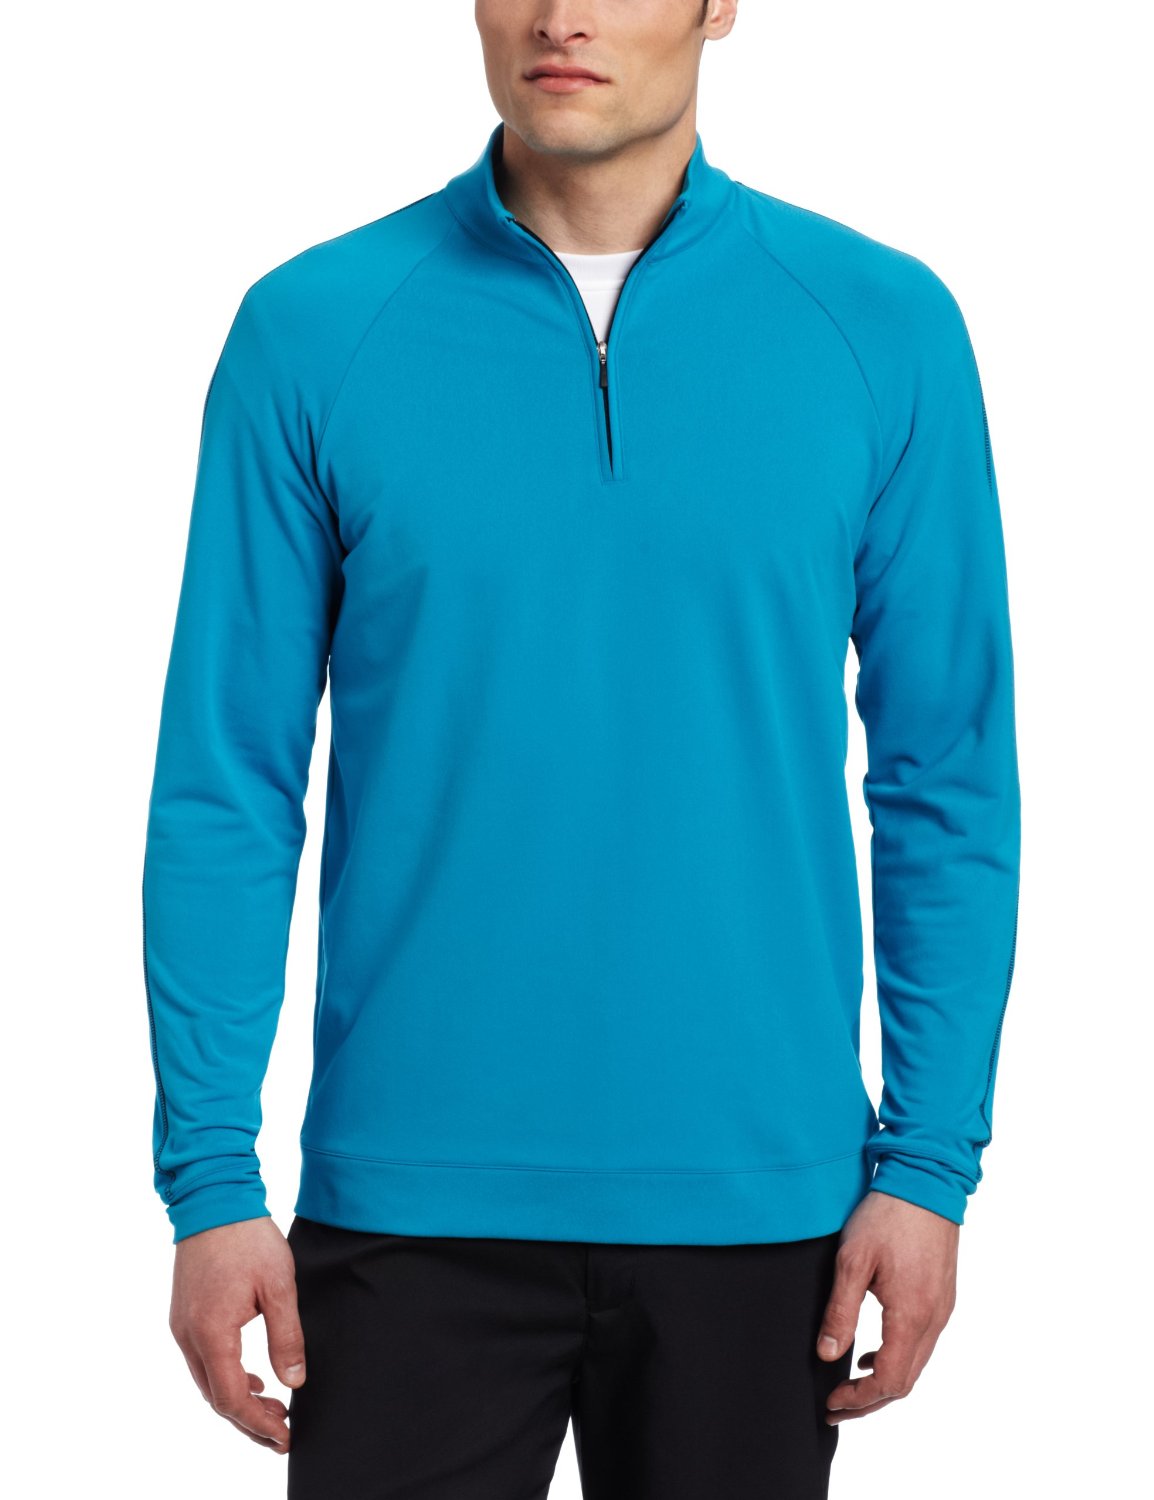 Adidas Climalite Contrast Stitch Golf Pullovers